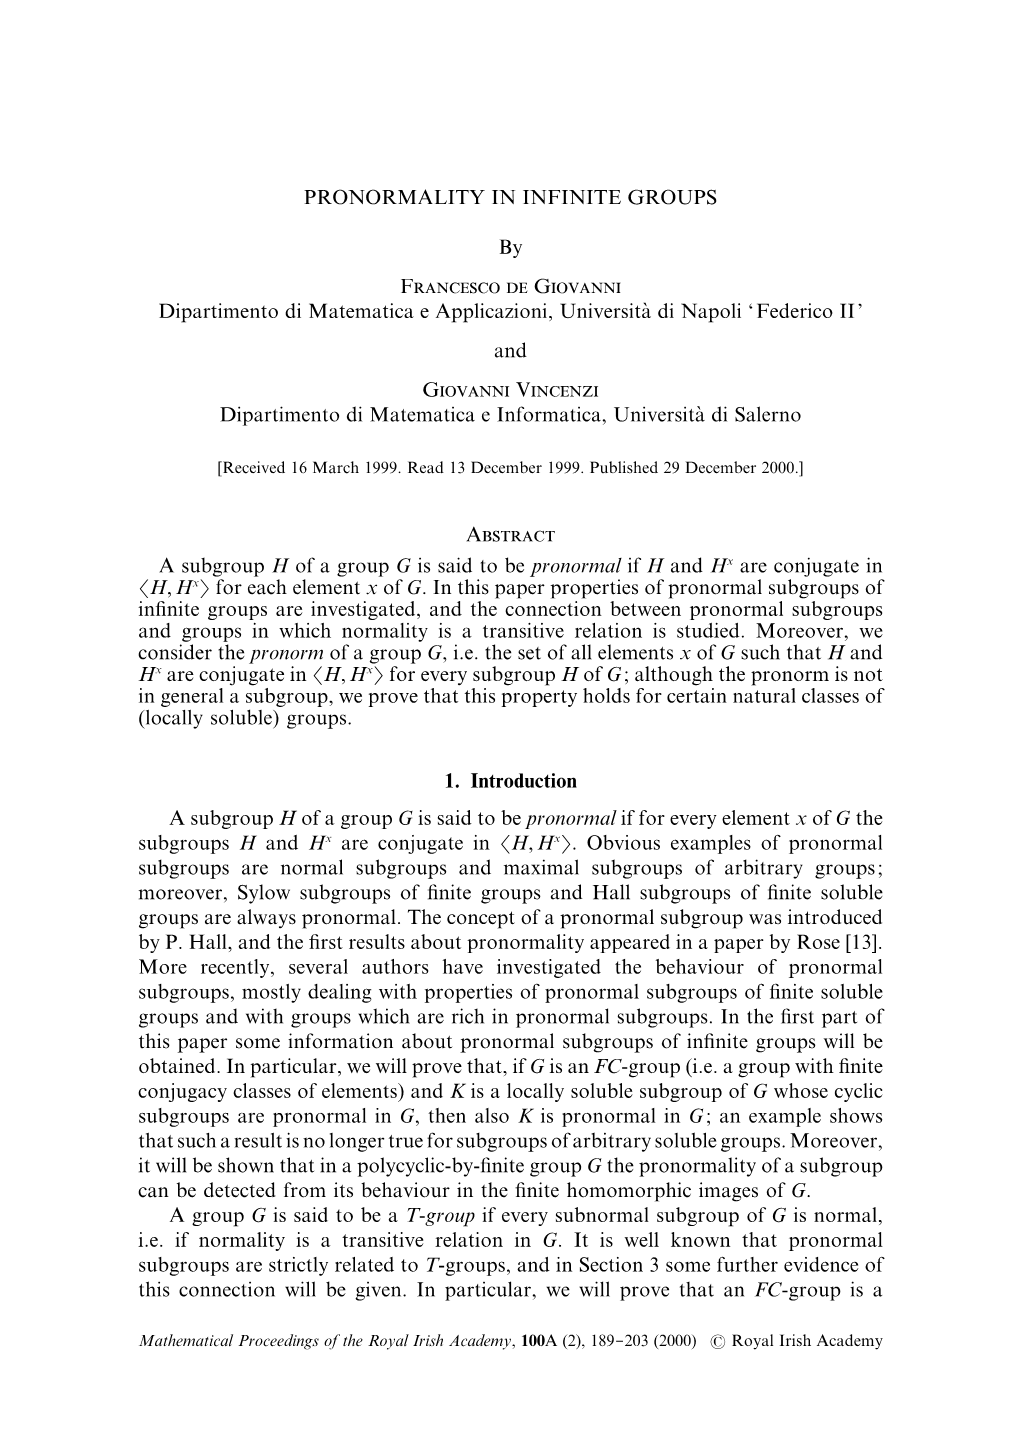 PRONORMALITY in INFINITE GROUPS by F G